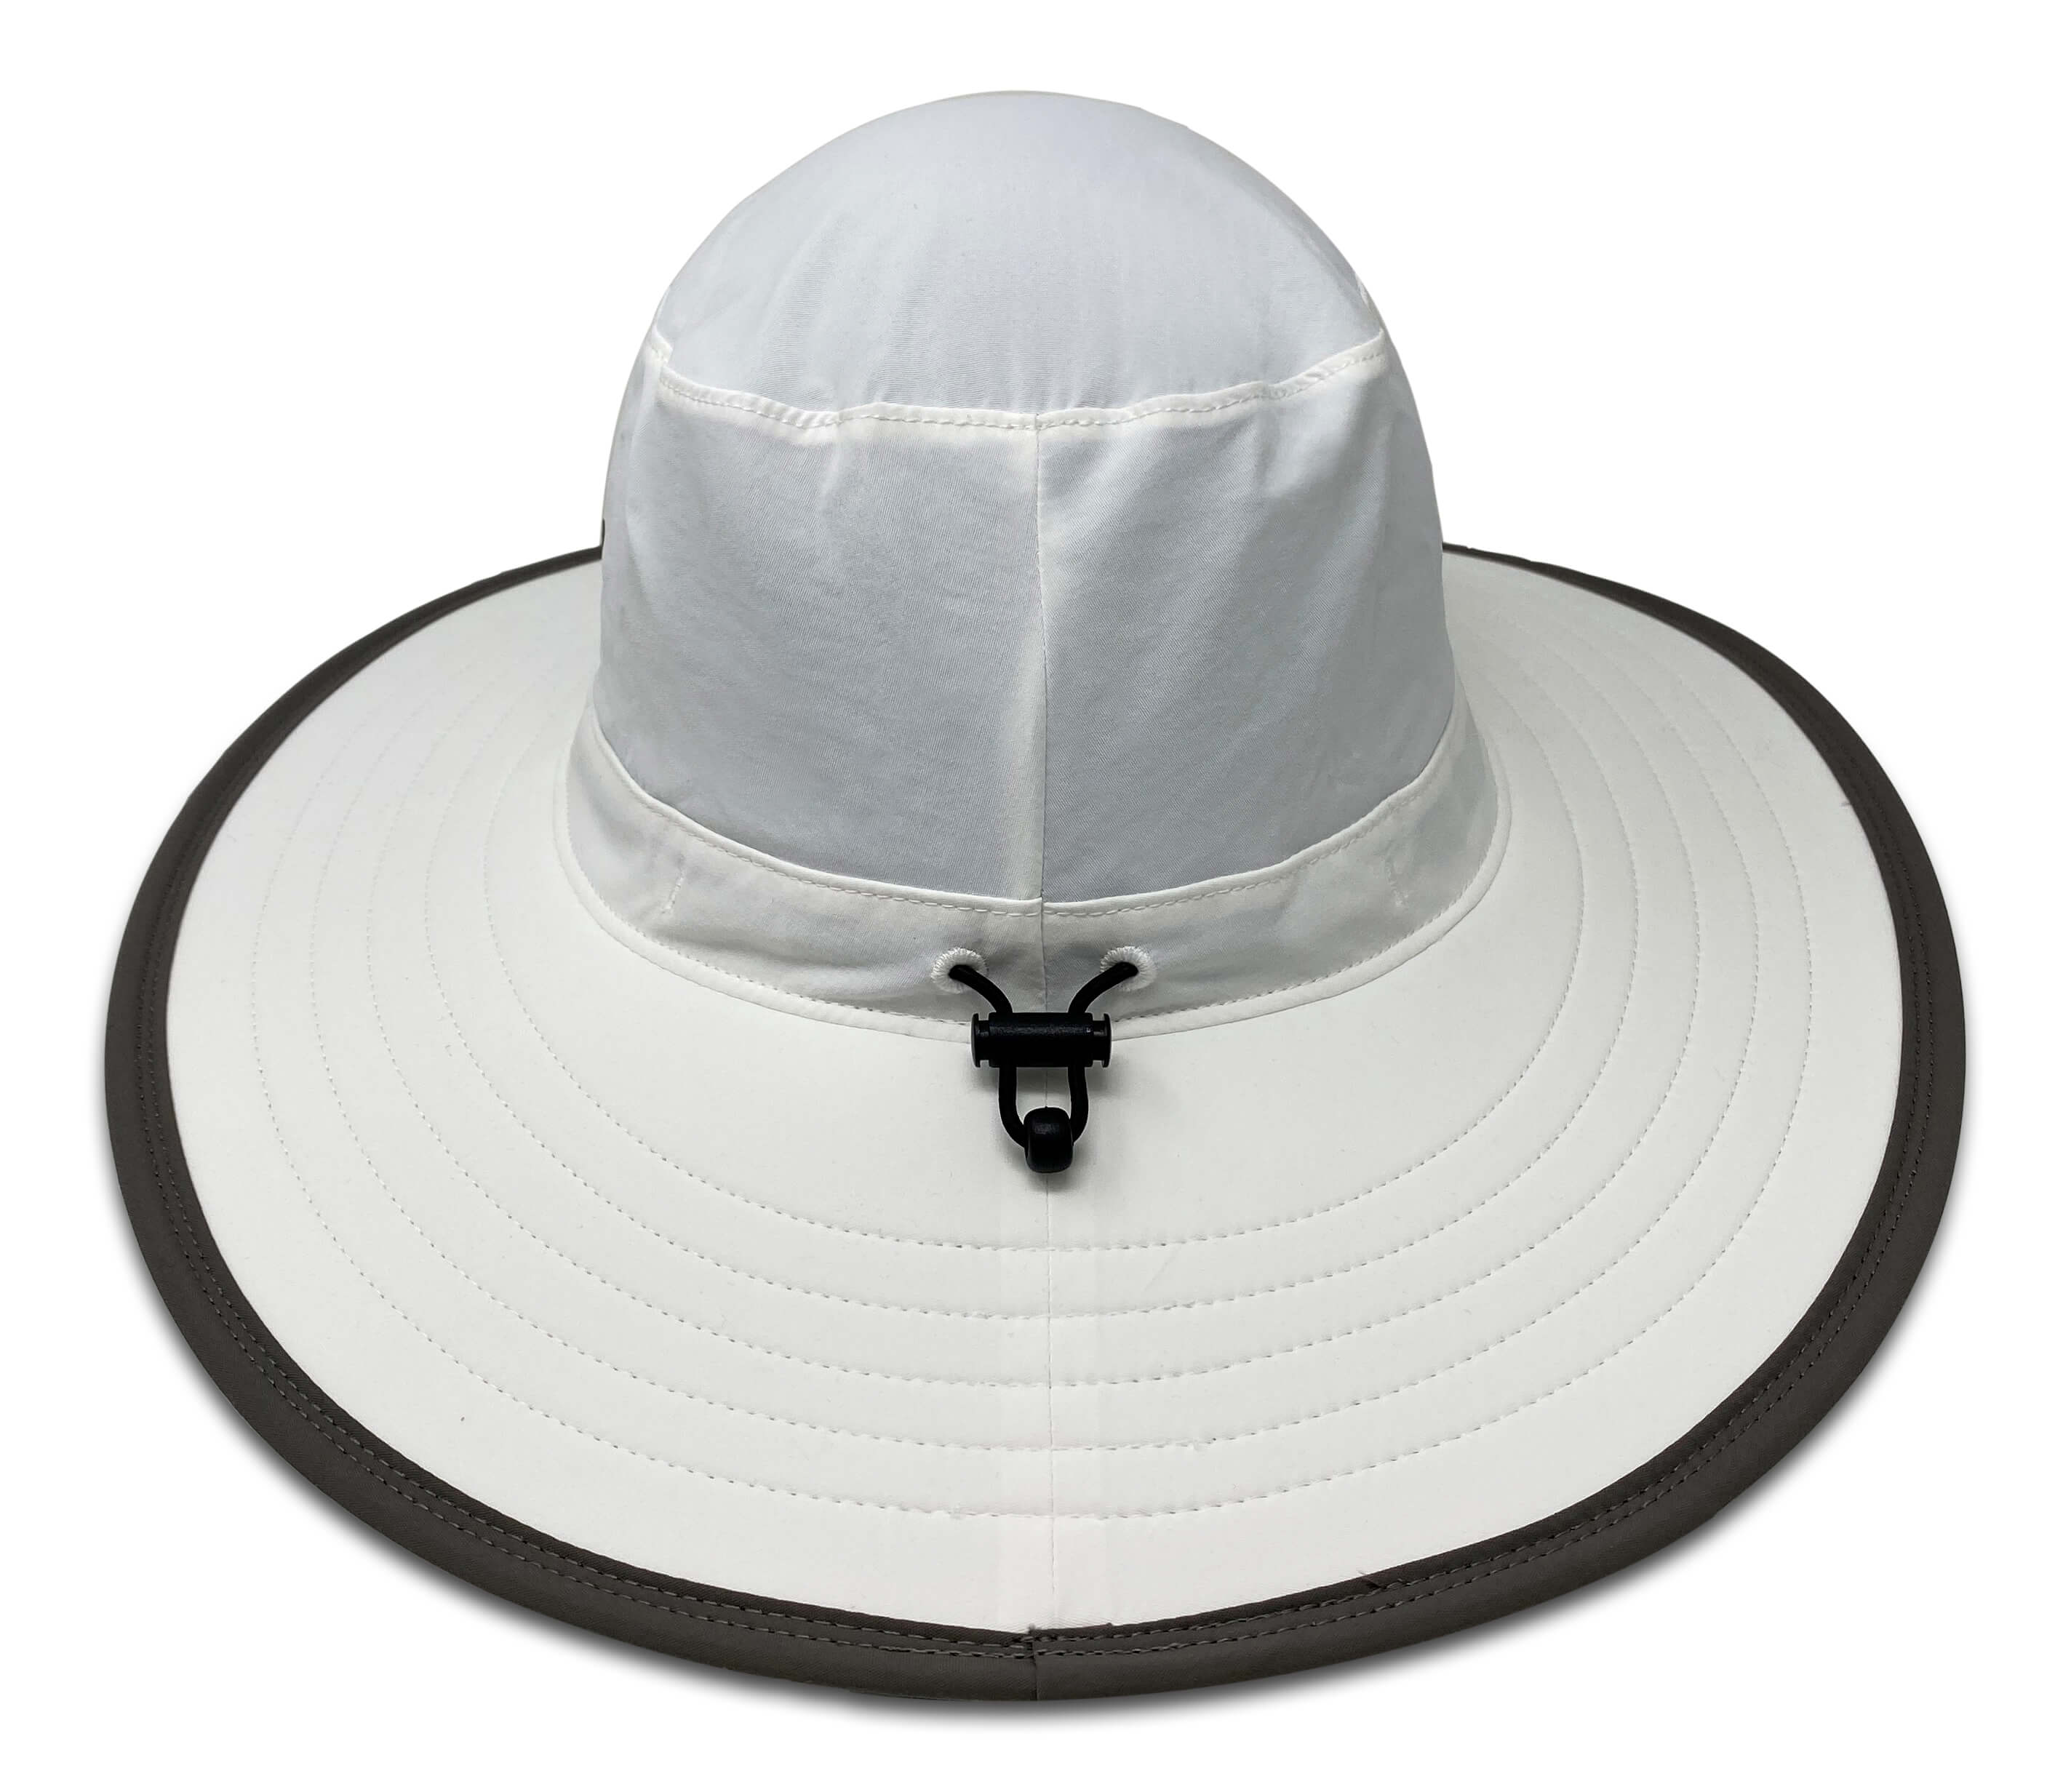 BlacktipH Bucket Fishing Hat in White with Charcoal Rim | Size Medium/Large